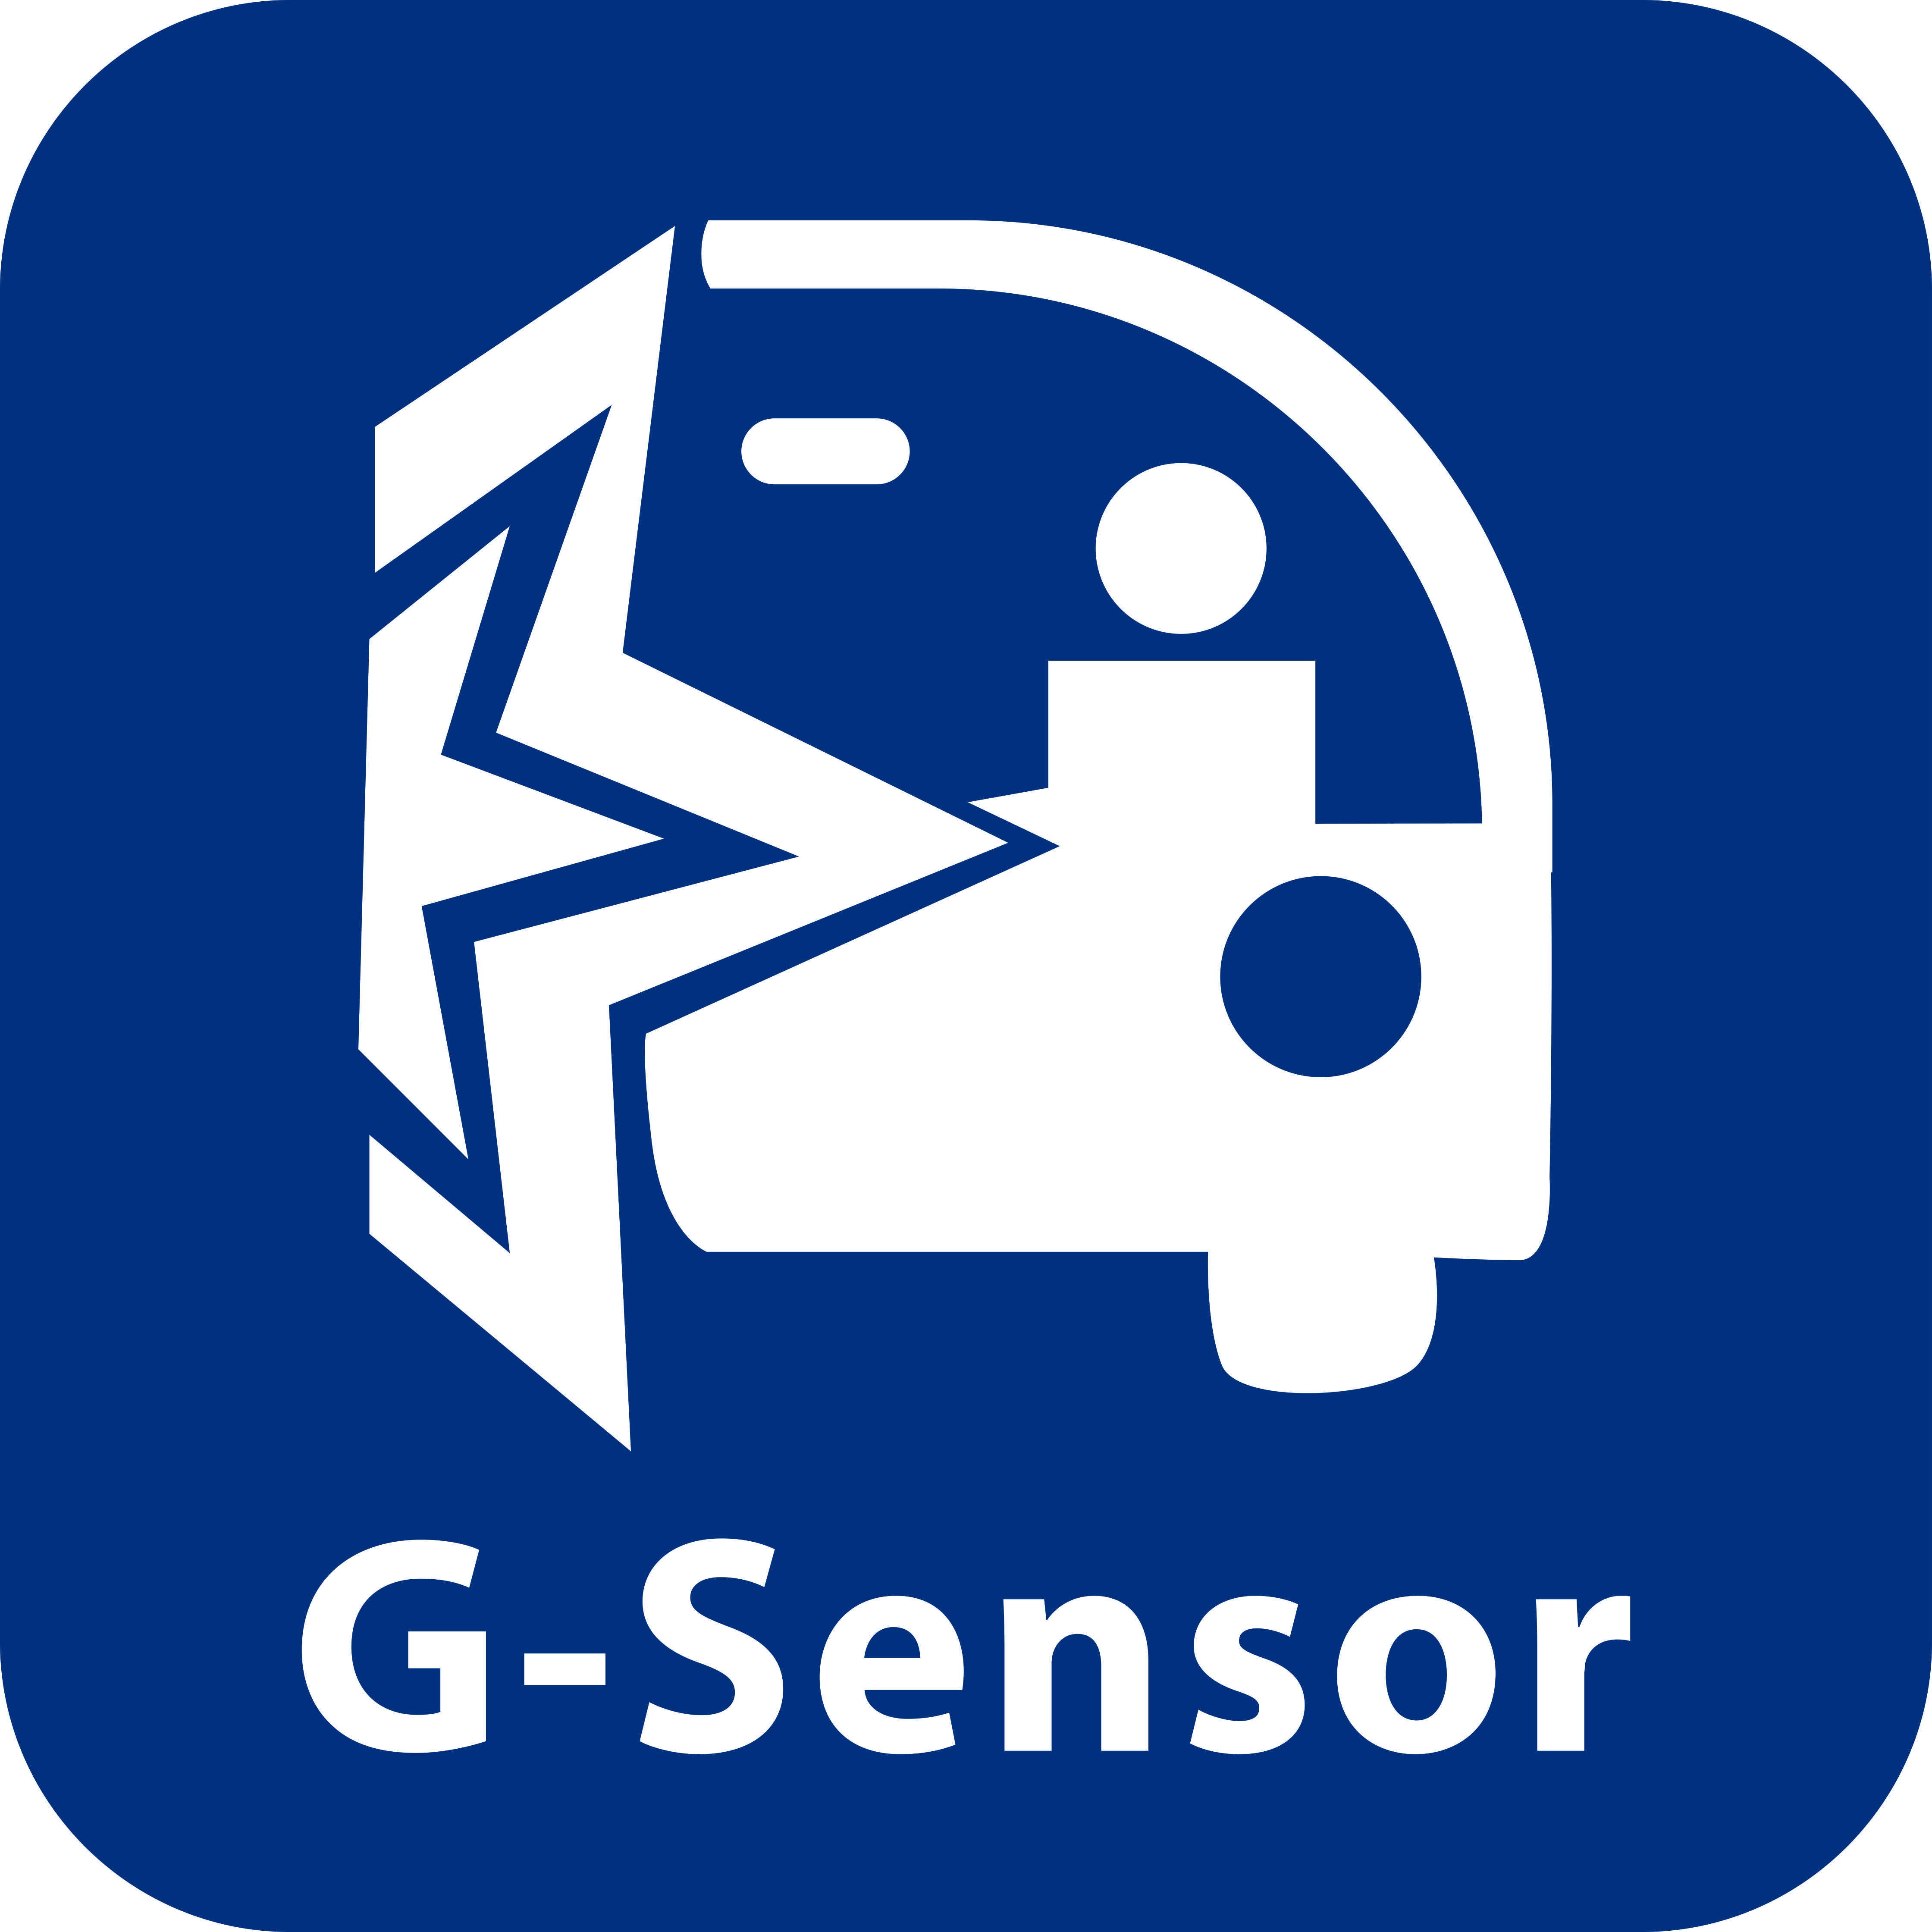 Video Mode with Motion Detection & G-sensor